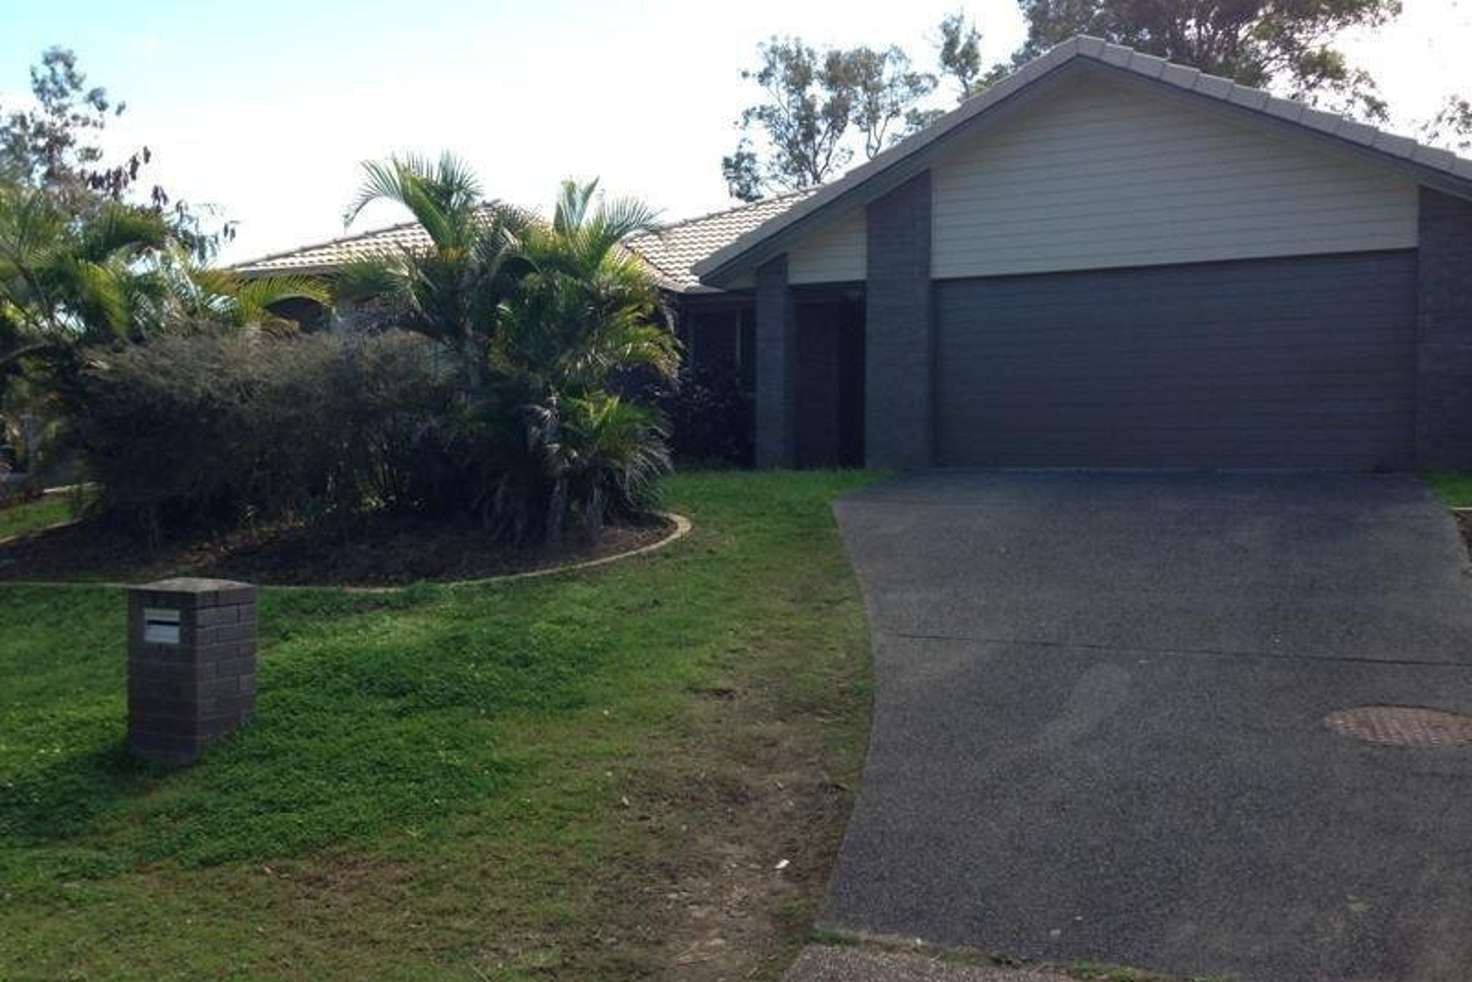 Main view of Homely house listing, 9 Tranquillity Cir, Brassall QLD 4305